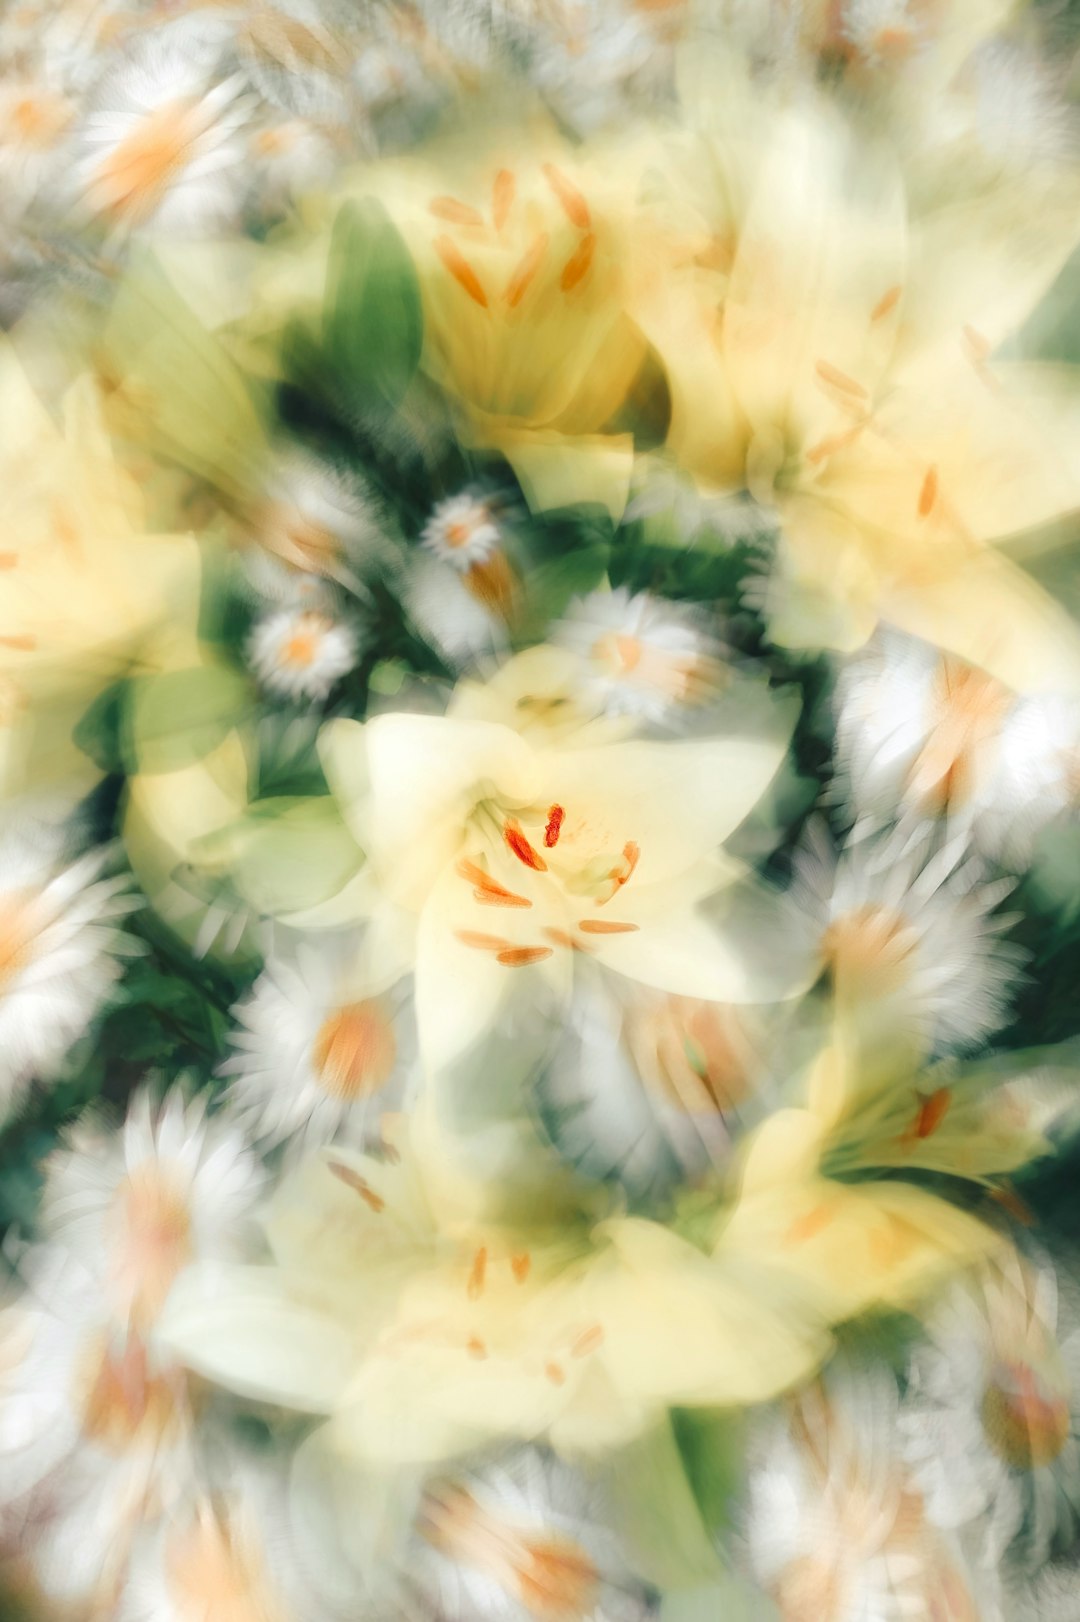 a blurry image of a white flower